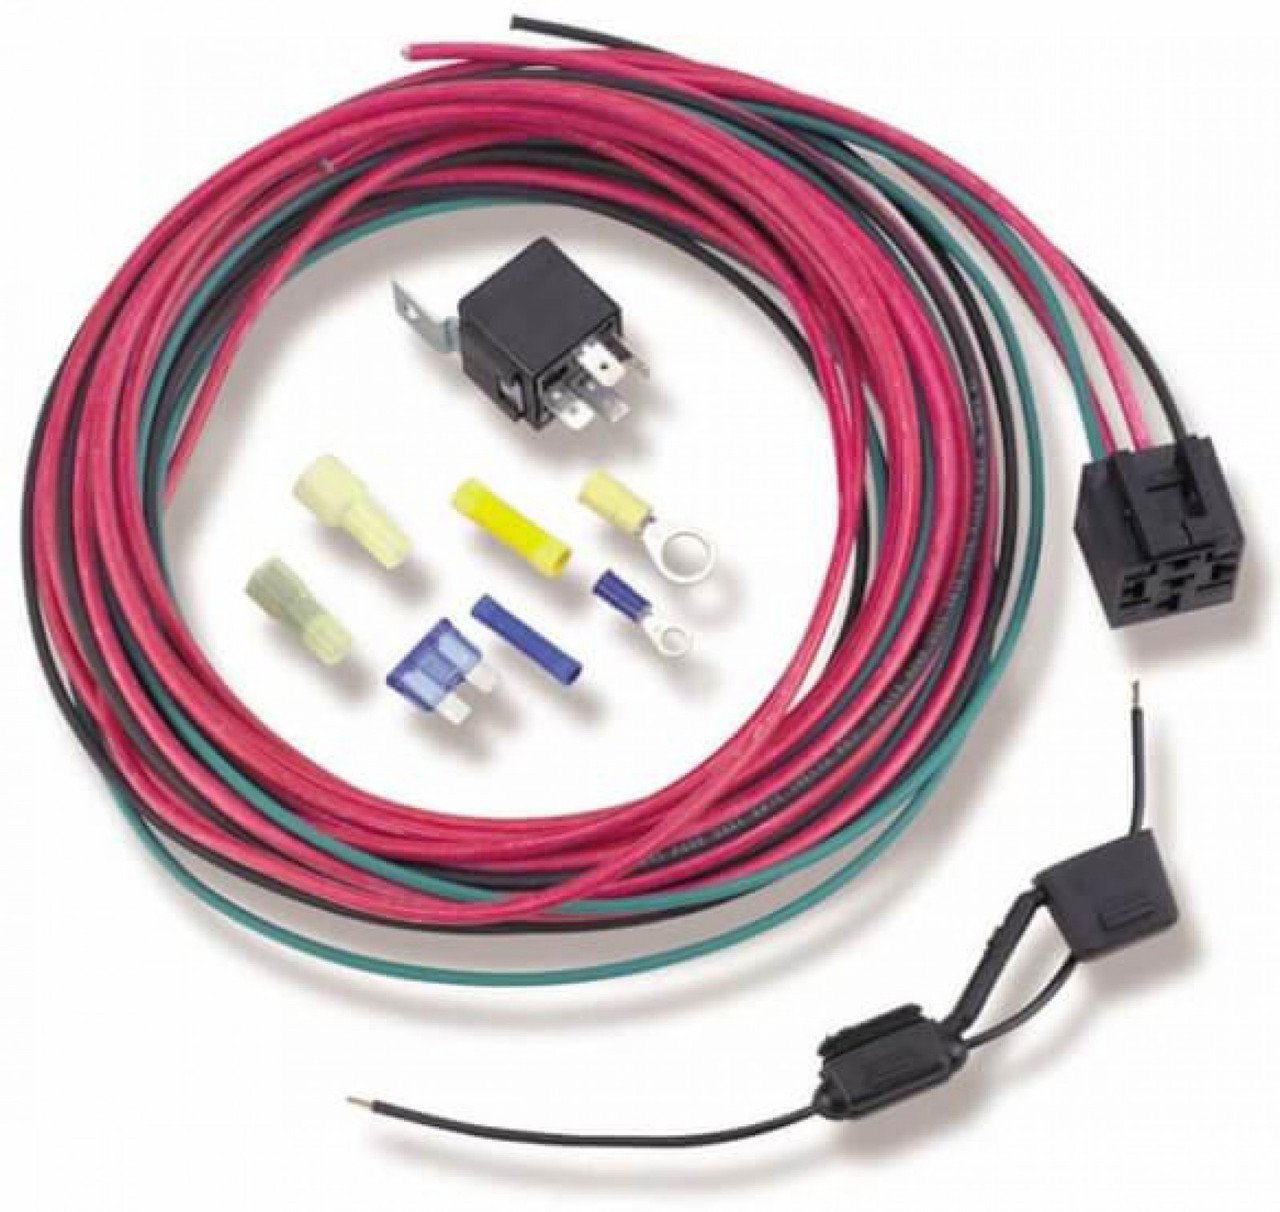 Holley 30 Amp Fuel Pump Relay Kit (HOL-212-753)